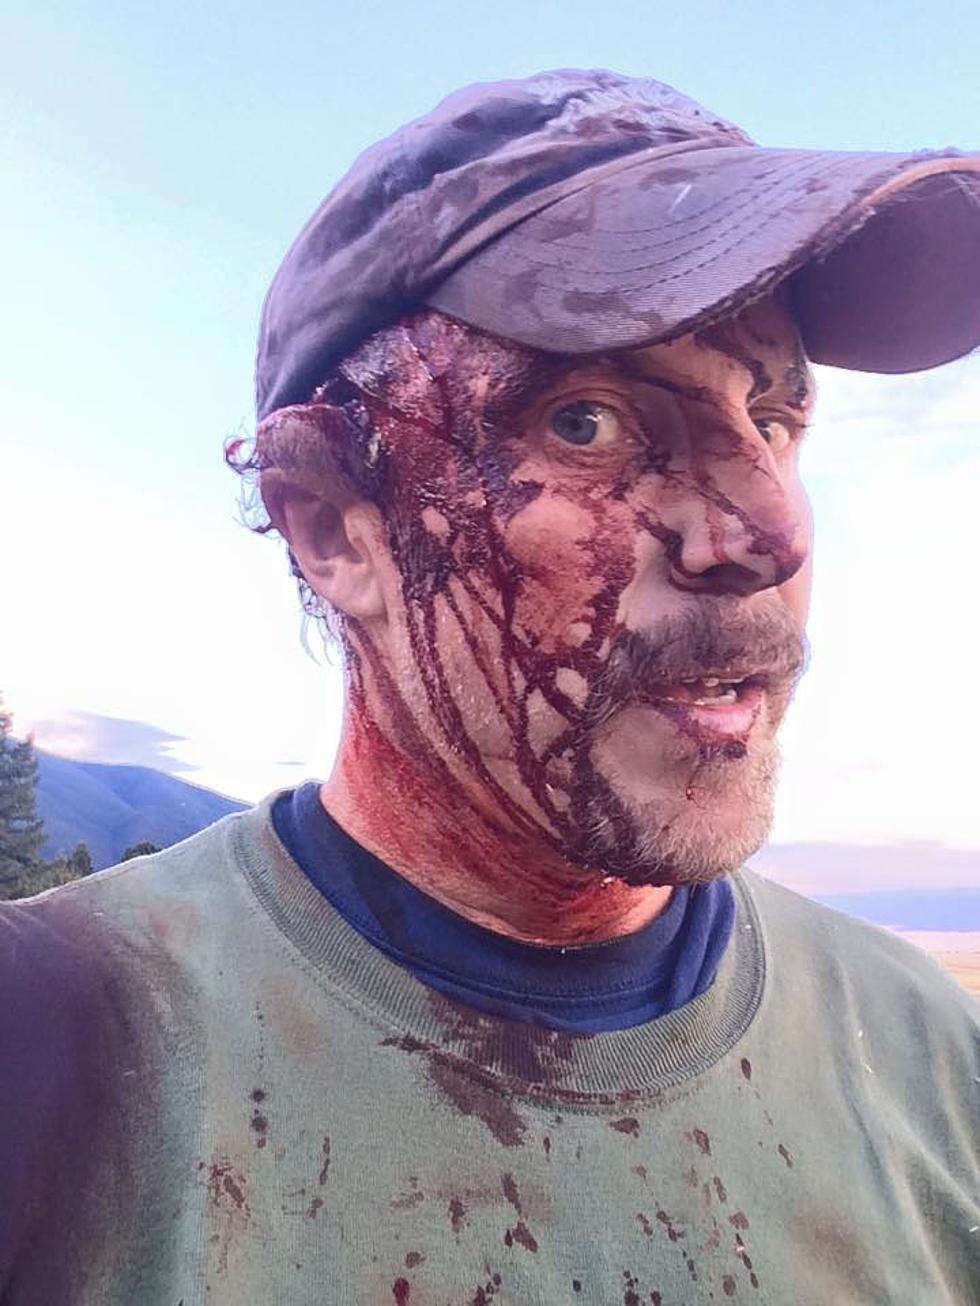 Guy Gets Attacked by a Bear TWICE in One Day, Posts Video [WARNING: Graphic]